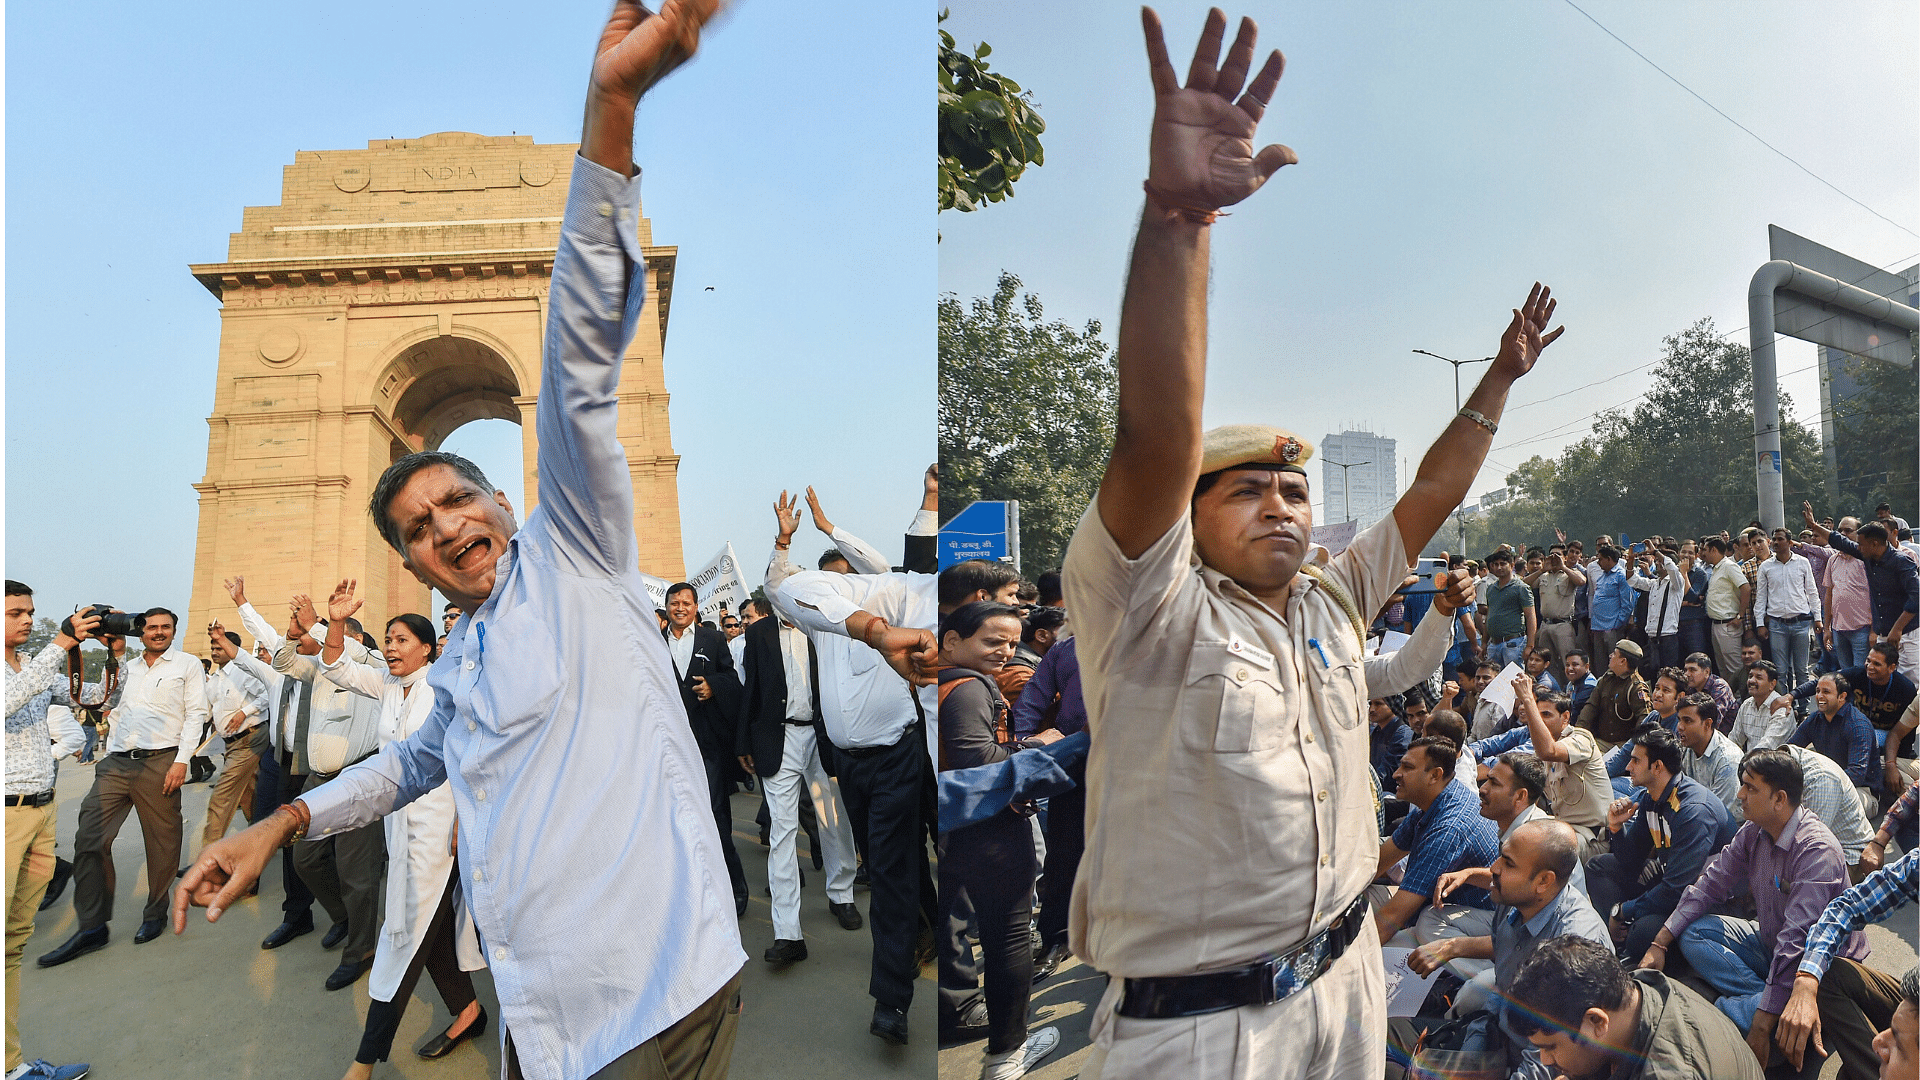 The face-off between the lawyers and Delhi Police continues to gain momentum.